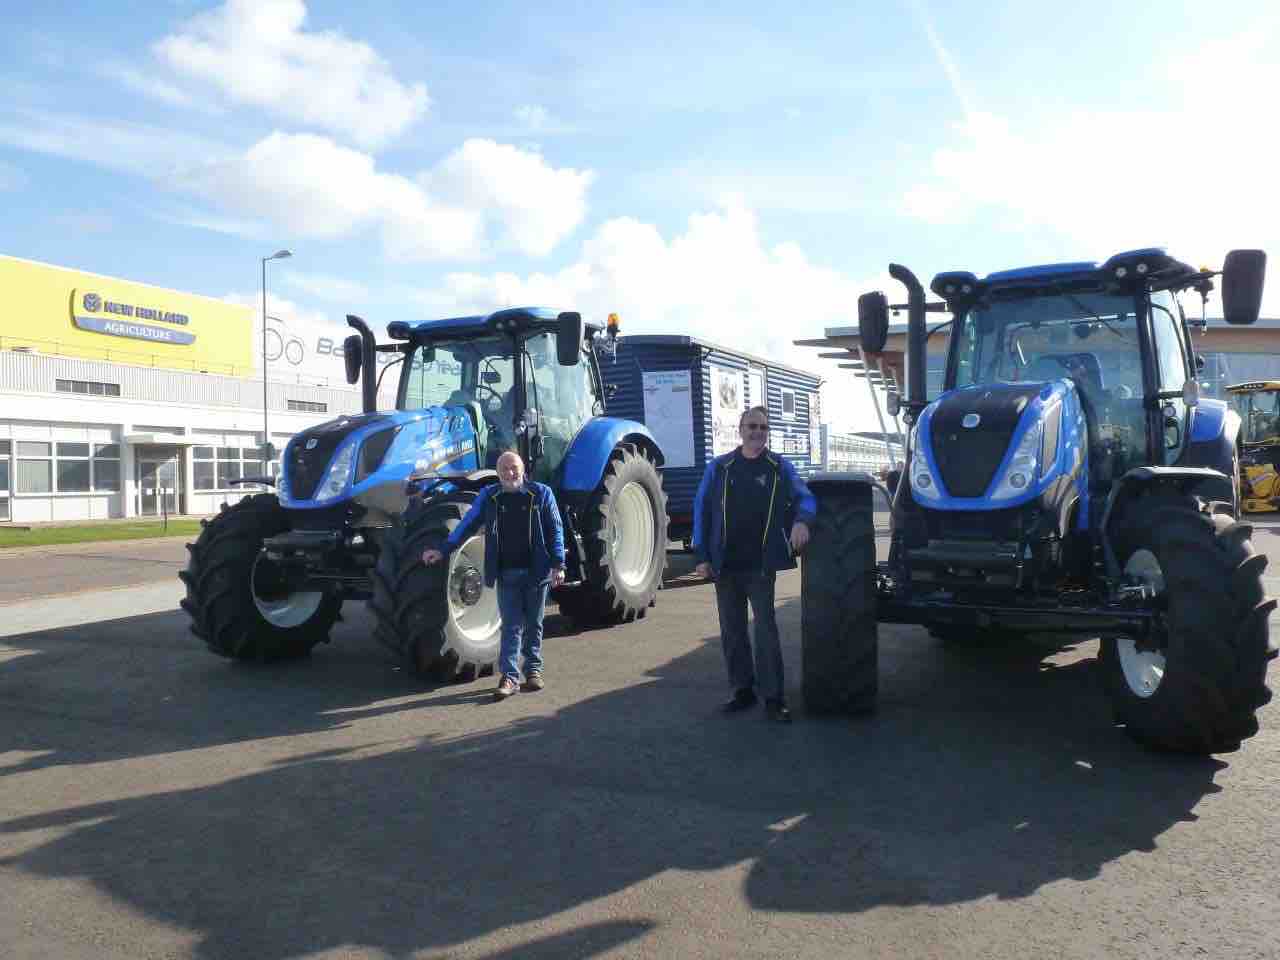 The pair will set off from New Holland's Basildon factory today in two new T6 tractors supplied by the manufacturer